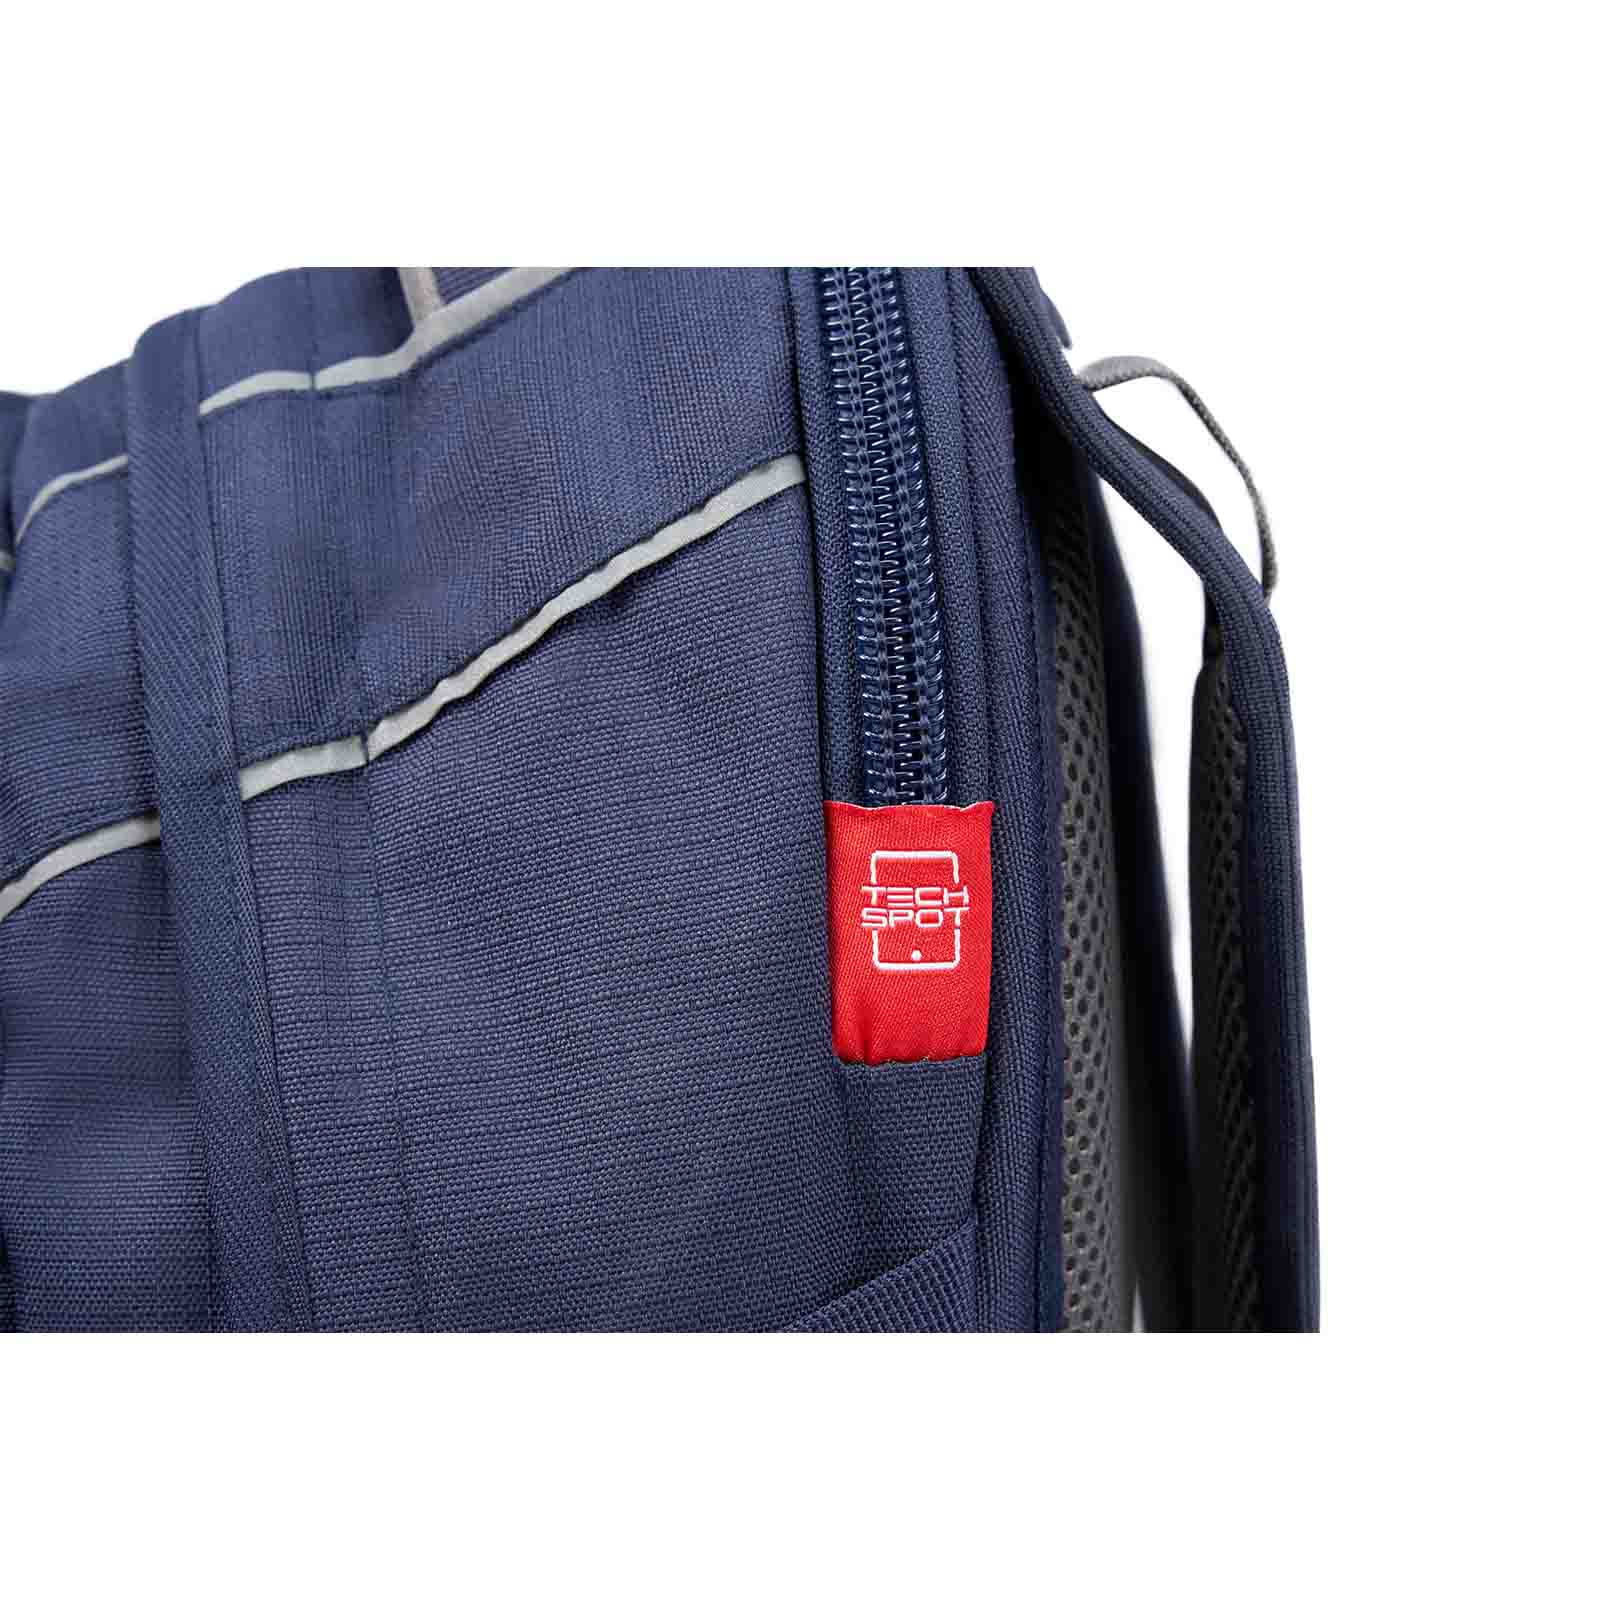 High-Sierra-Access-3-Eco-16-Inch-Laptop-Backpack-Marine-Blue-Suspenssion